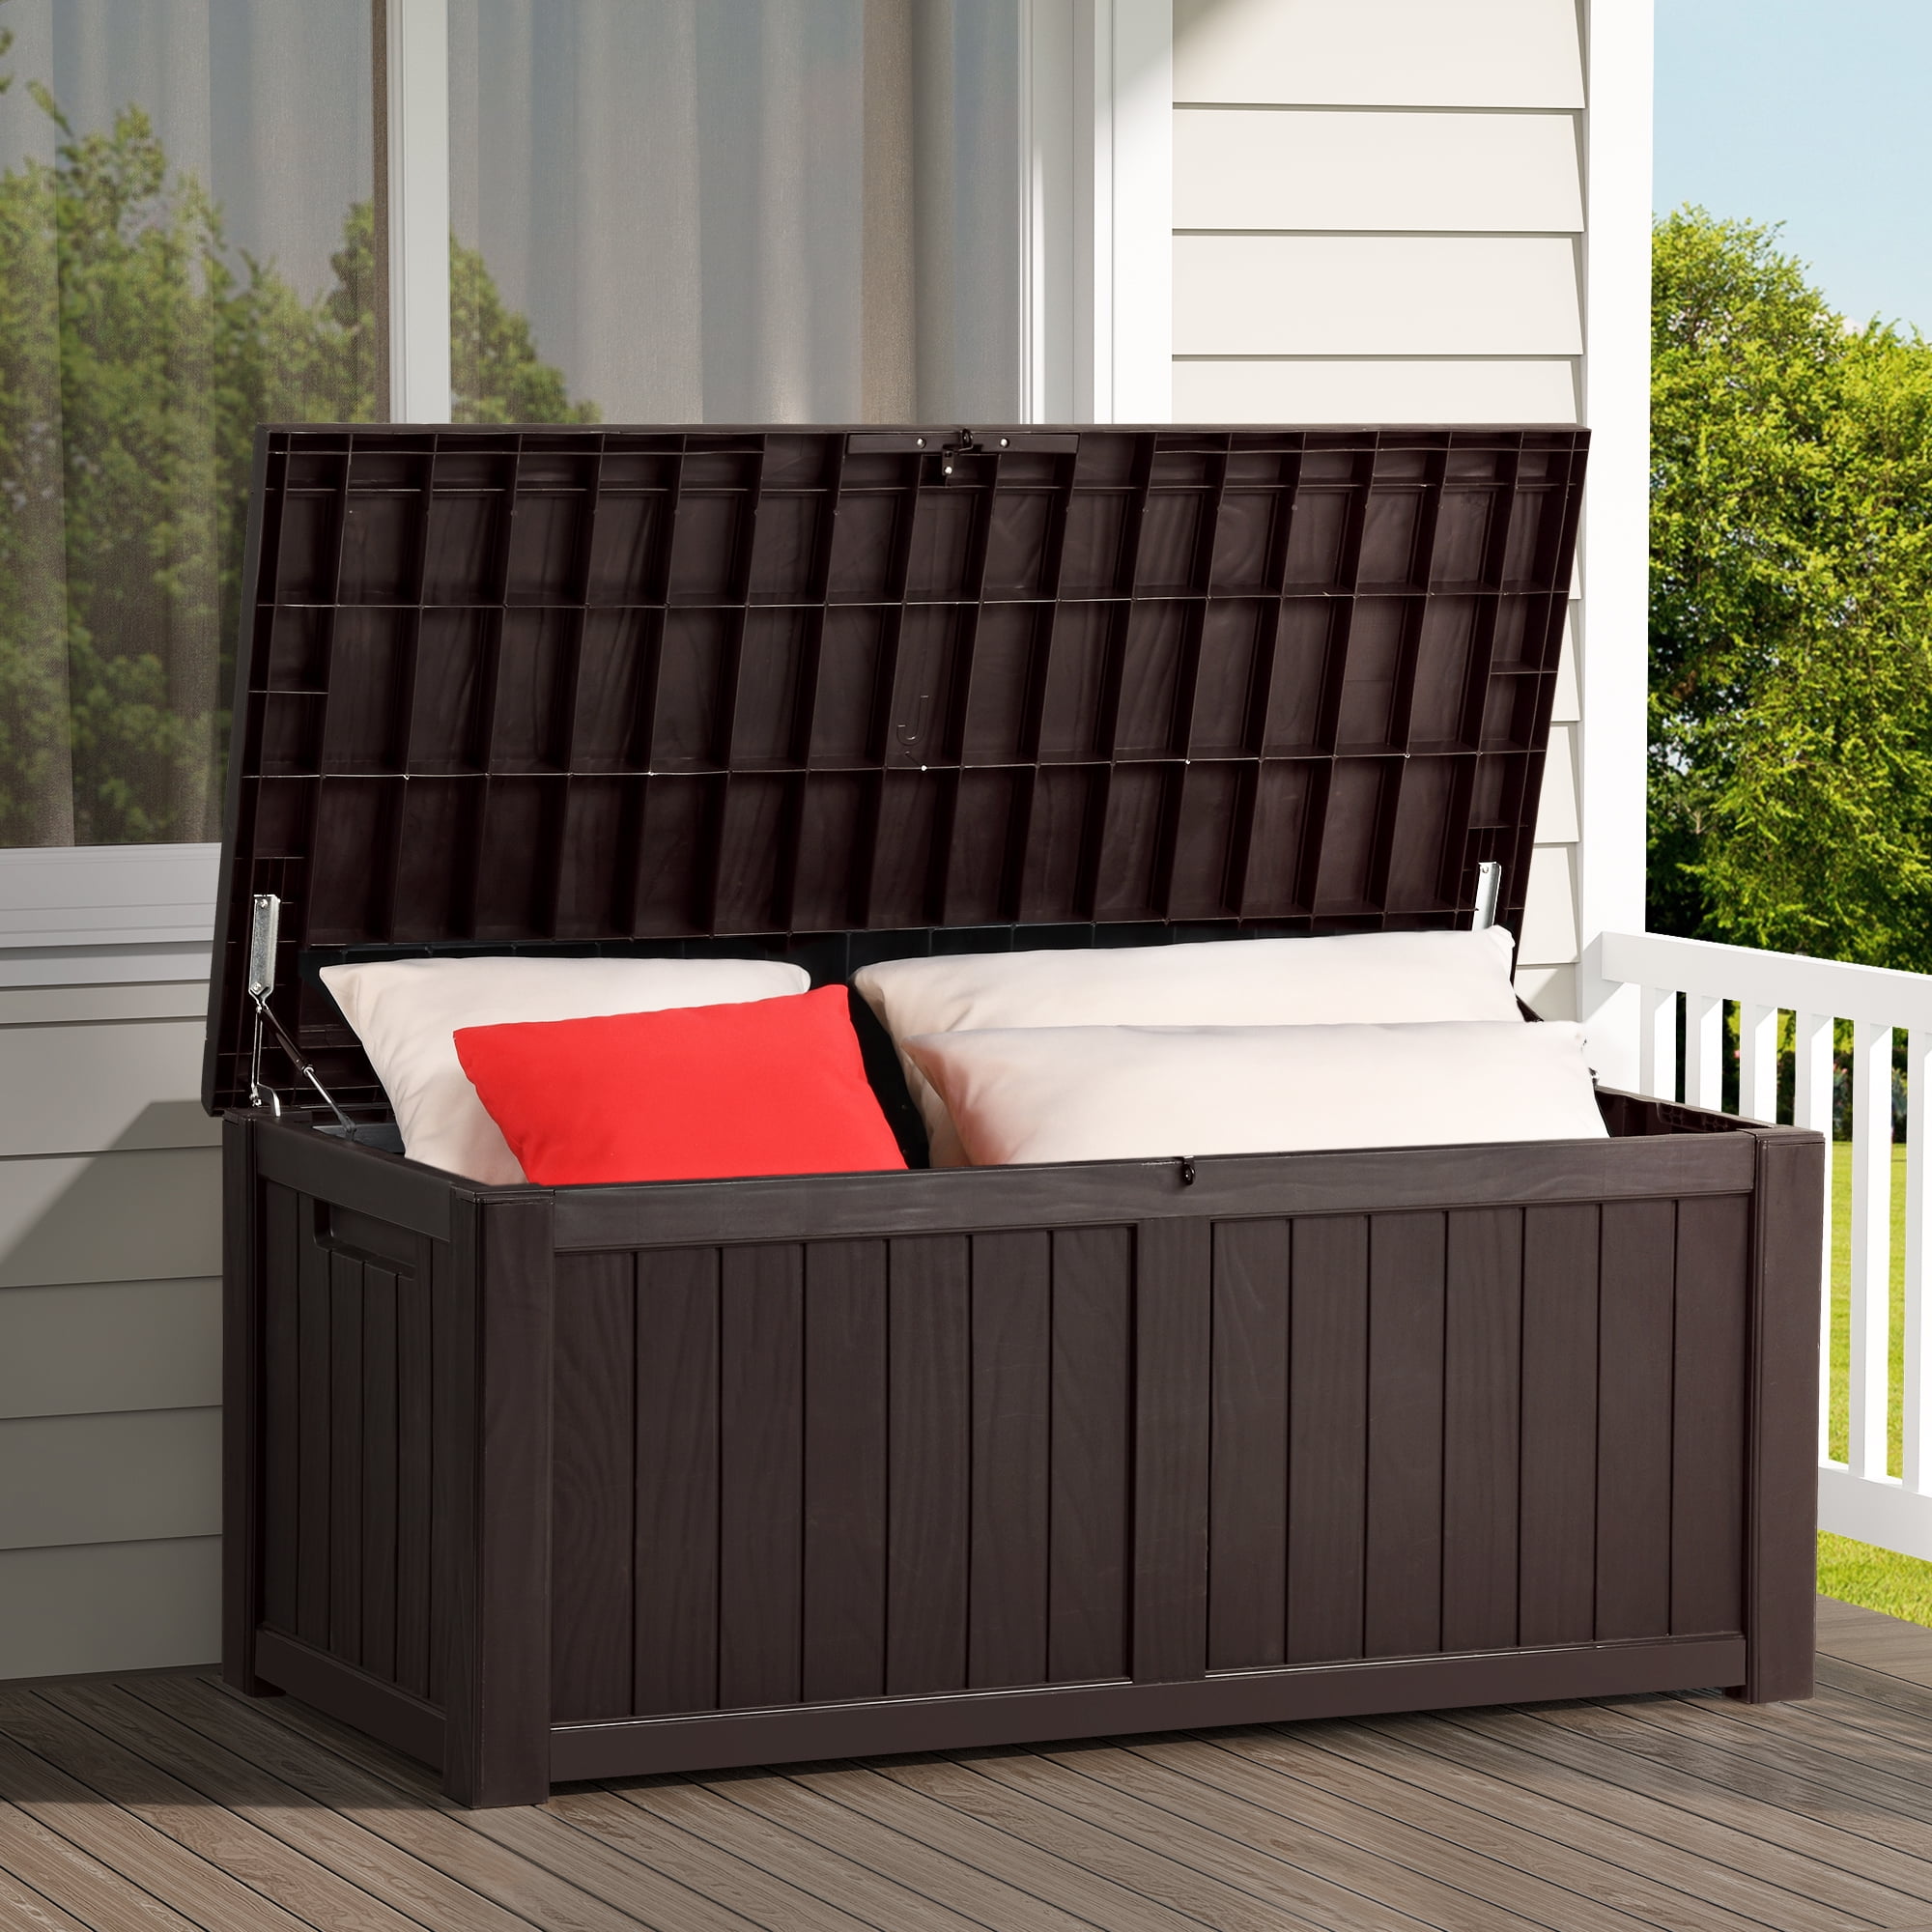 Dextrus Outdoor Storage Deck Box for Outdoor Pillows and Pool